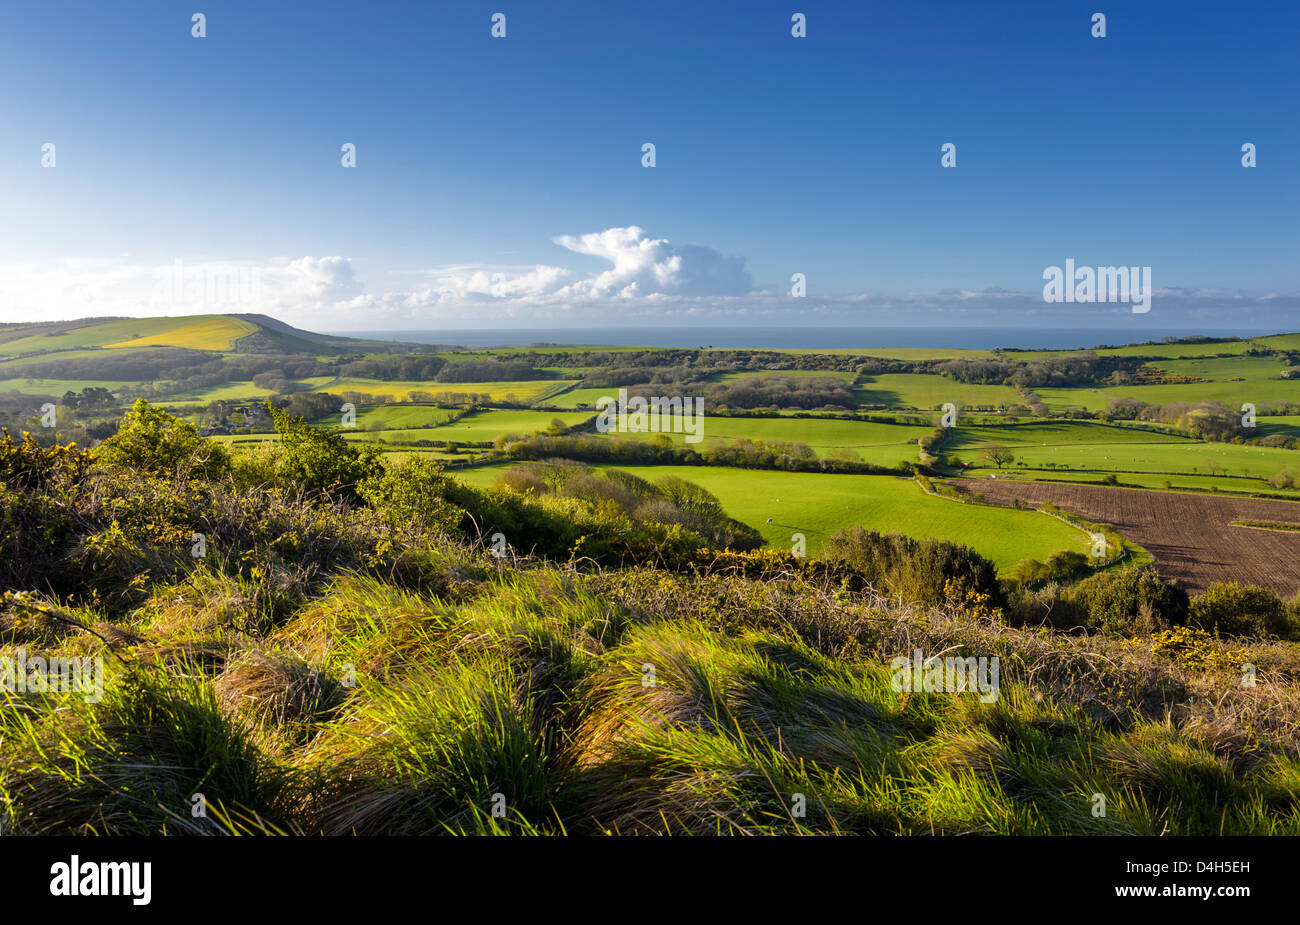 View of the Dorset countryside from the Isle of Purbeck taken from the Lulworth firing ranges. Stock Photo